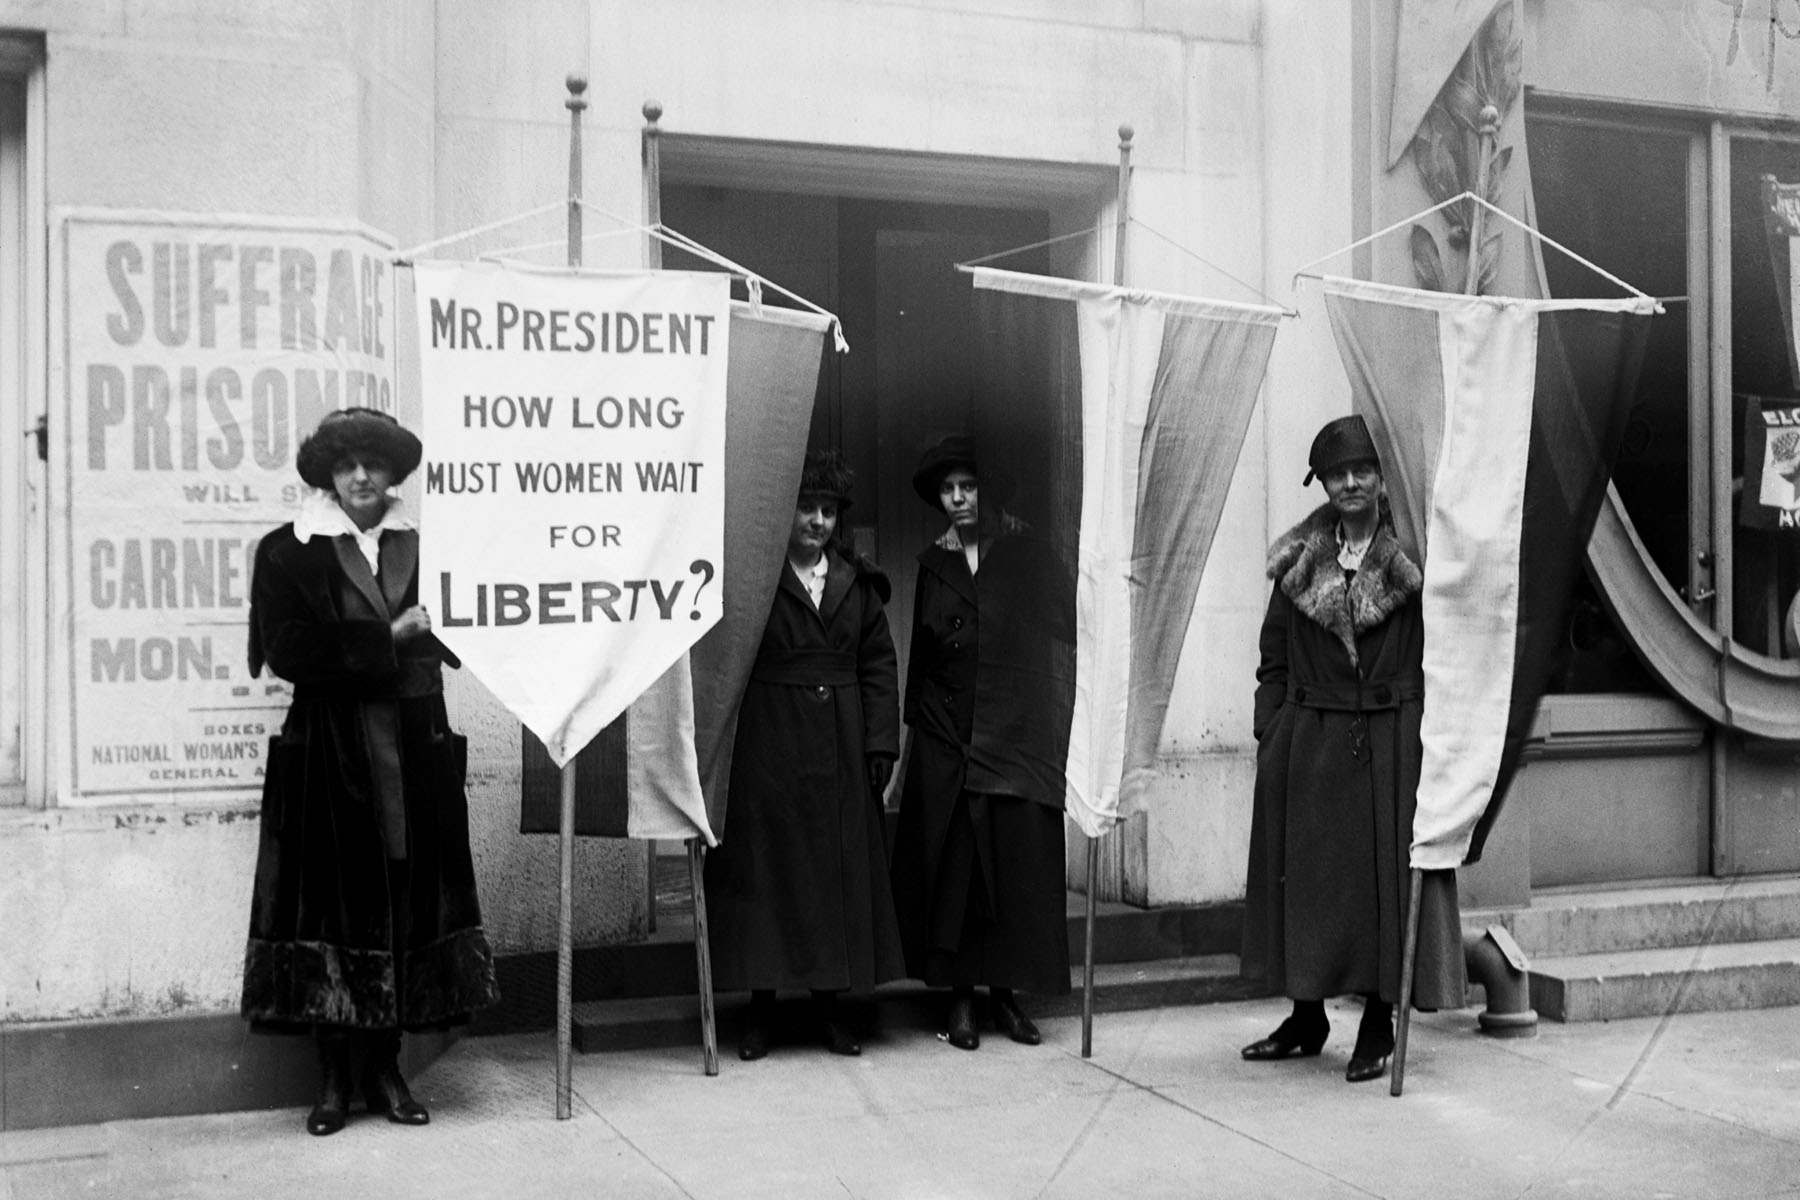 A group of suffragists, including Alice Paul, picket outside the Metropolitan Opera House in New York City in 1919.